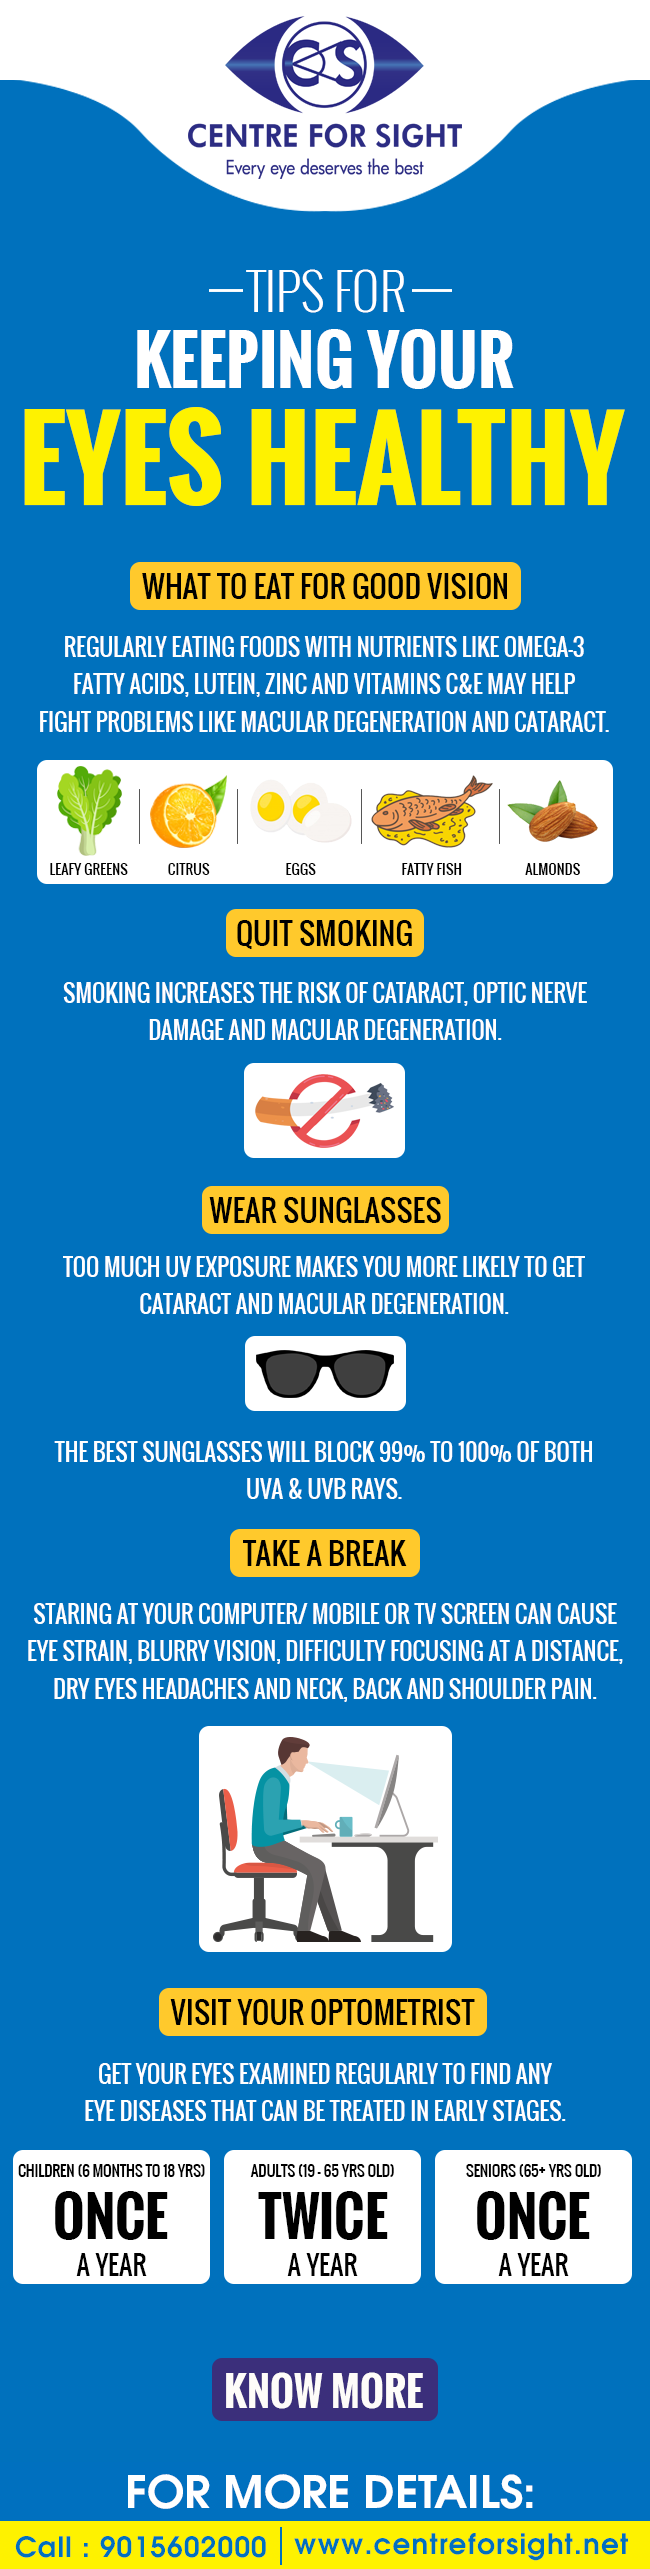 Tips for Keeping your Eyes Healthy.png  by centreforsight